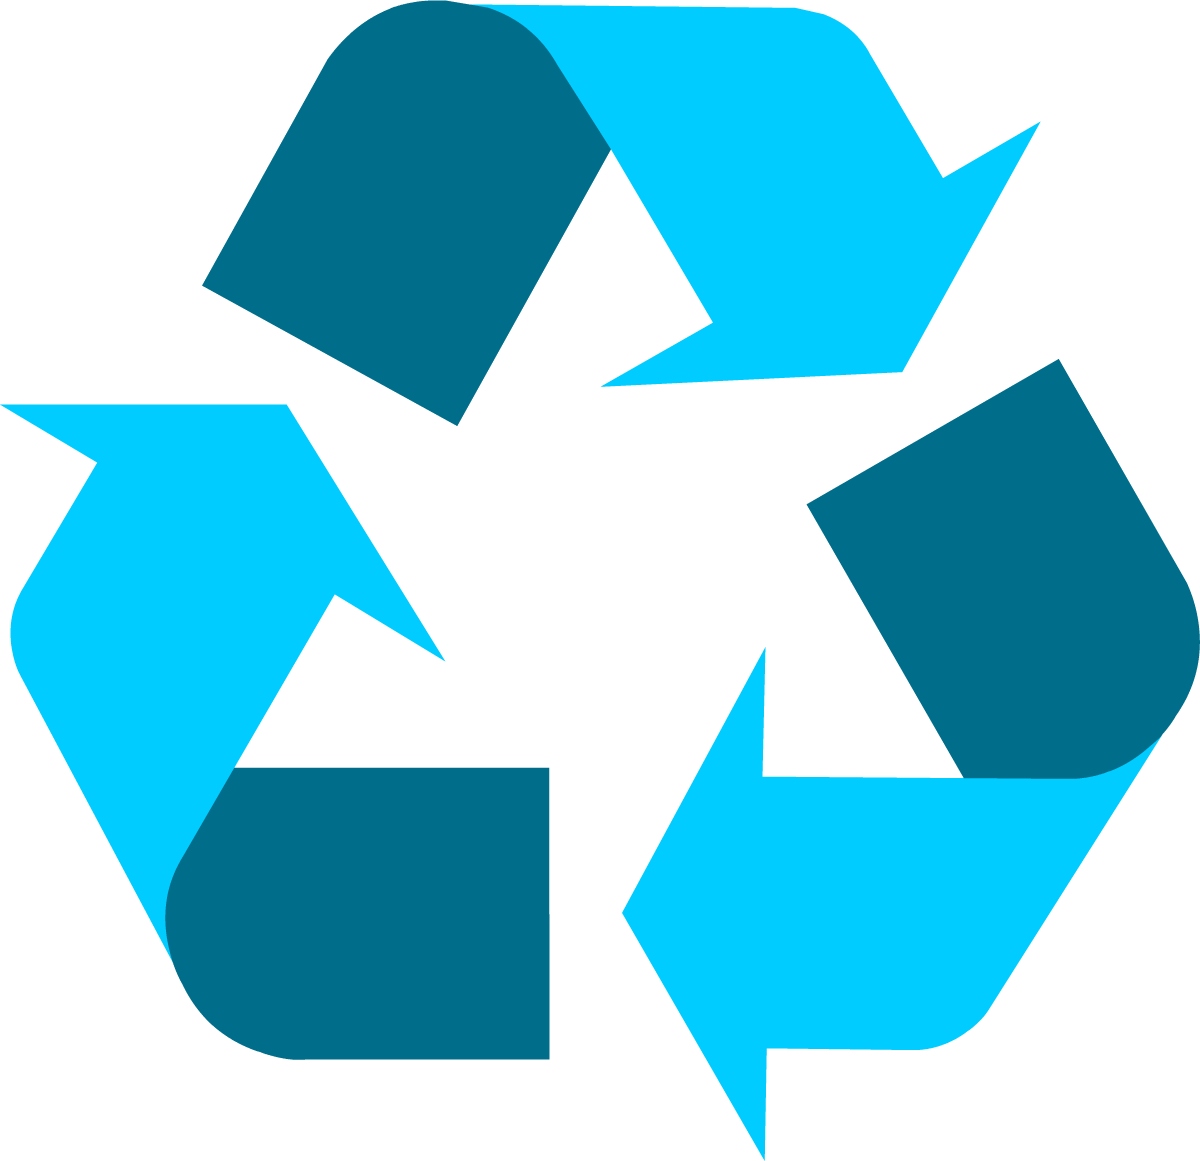 Teal and Blue Logo - Recycling Symbol - Download the Original Recycle Logo